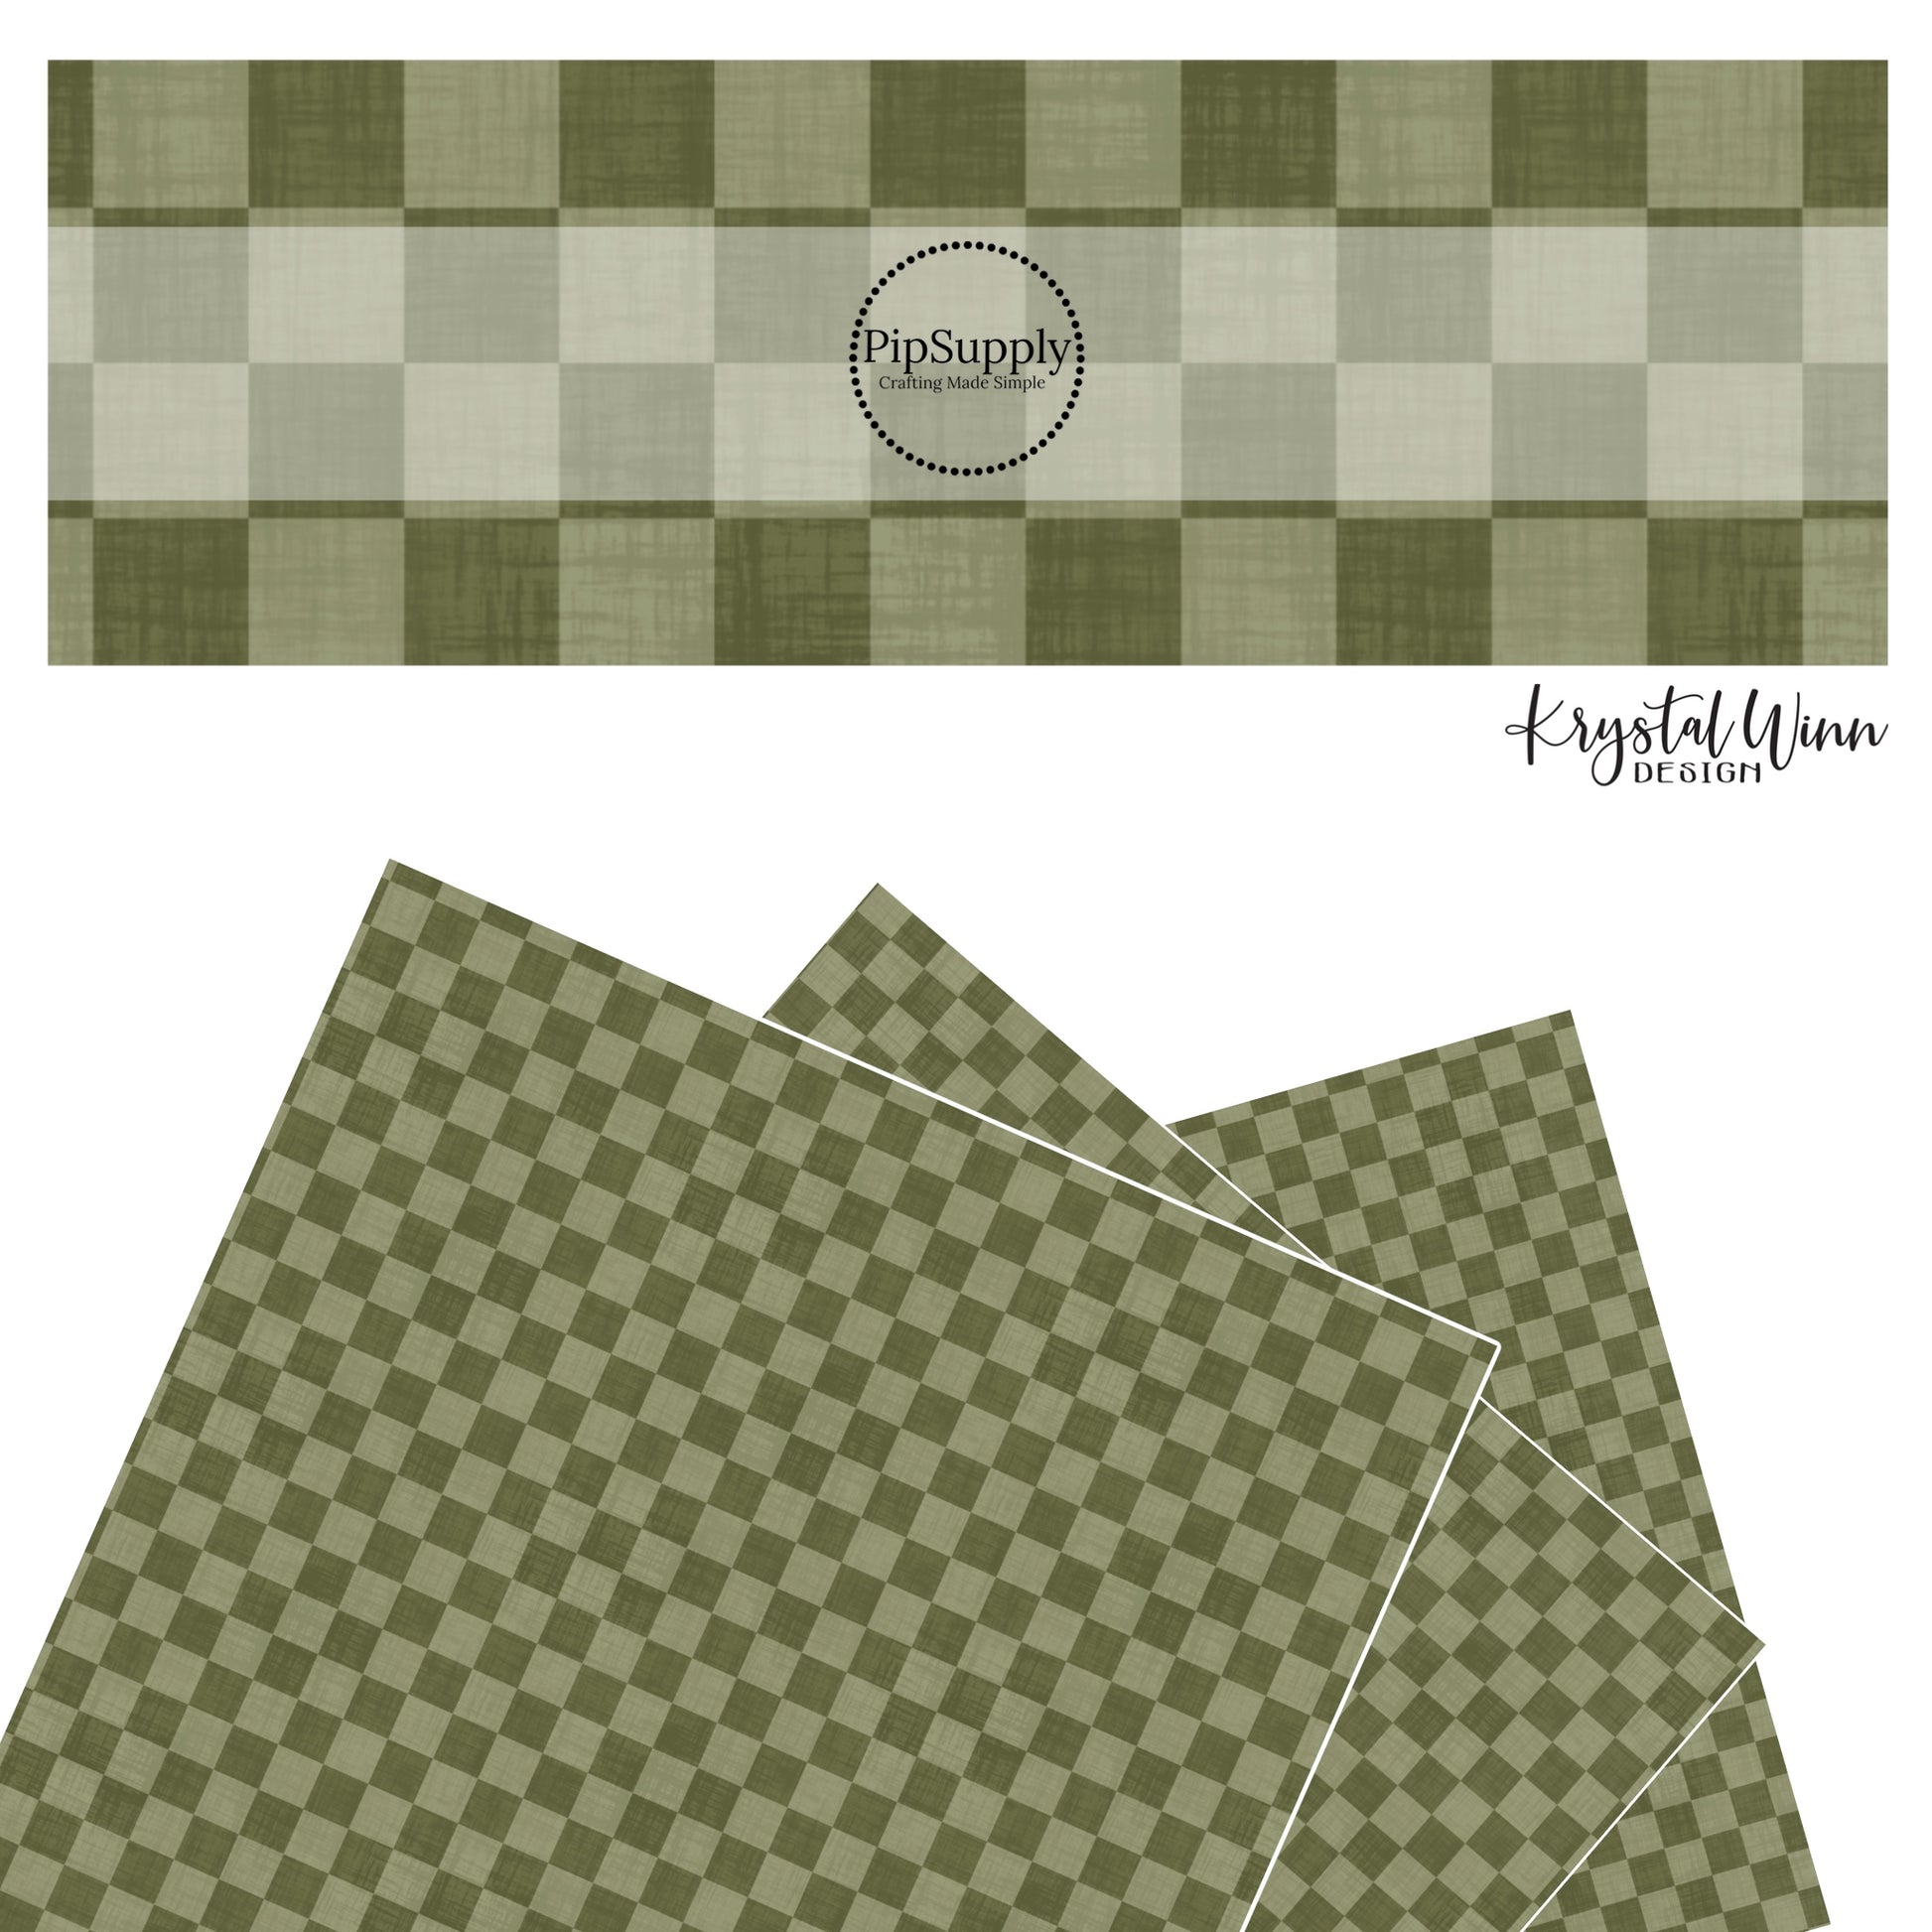 Dark green and light green checkered faux leather sheets